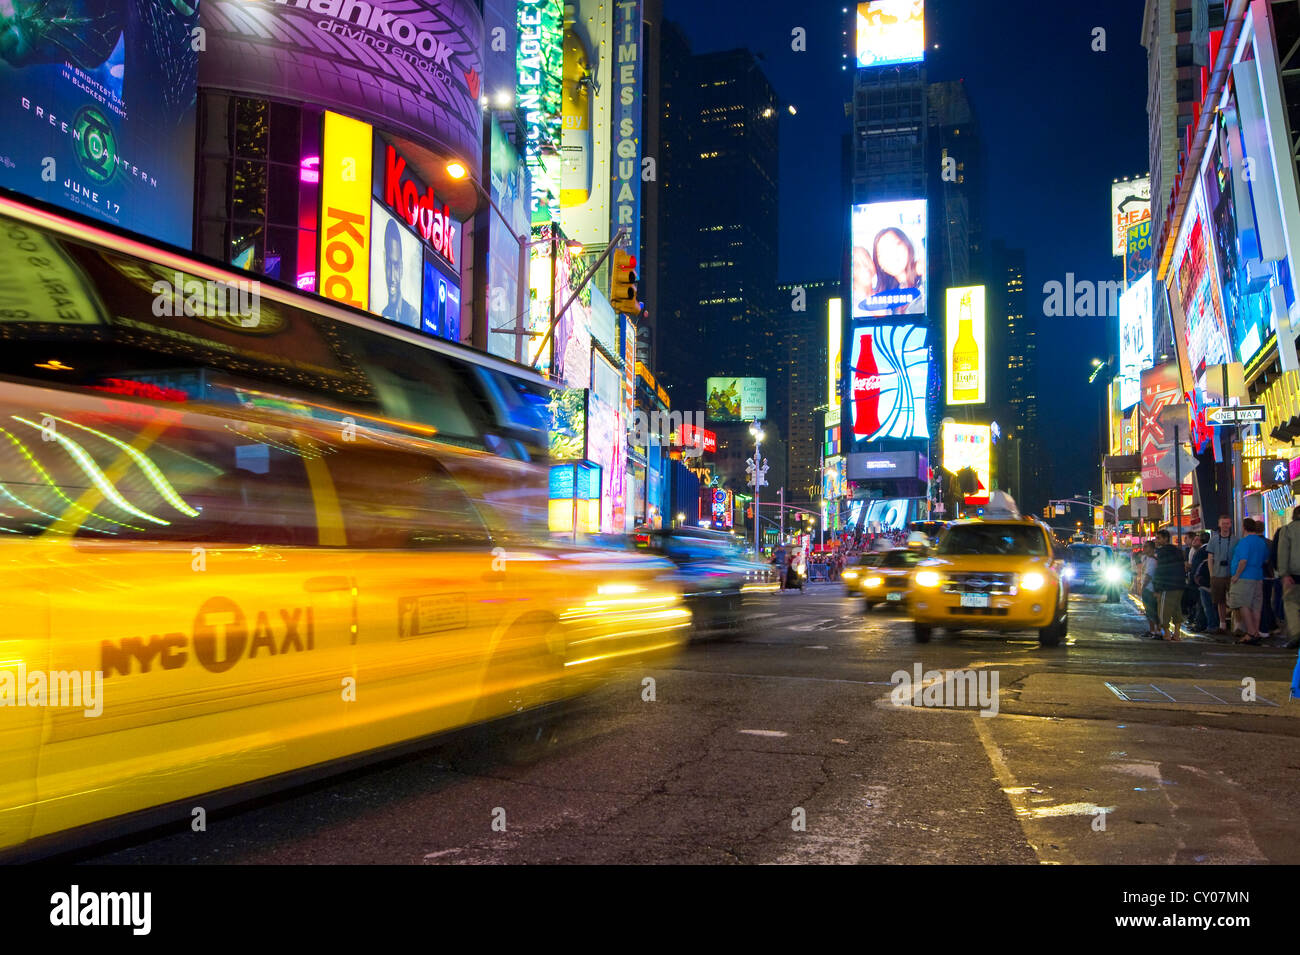 Taxi with motion blur in Times Square, night scene, Manhattan, New York, USA Stock Photo